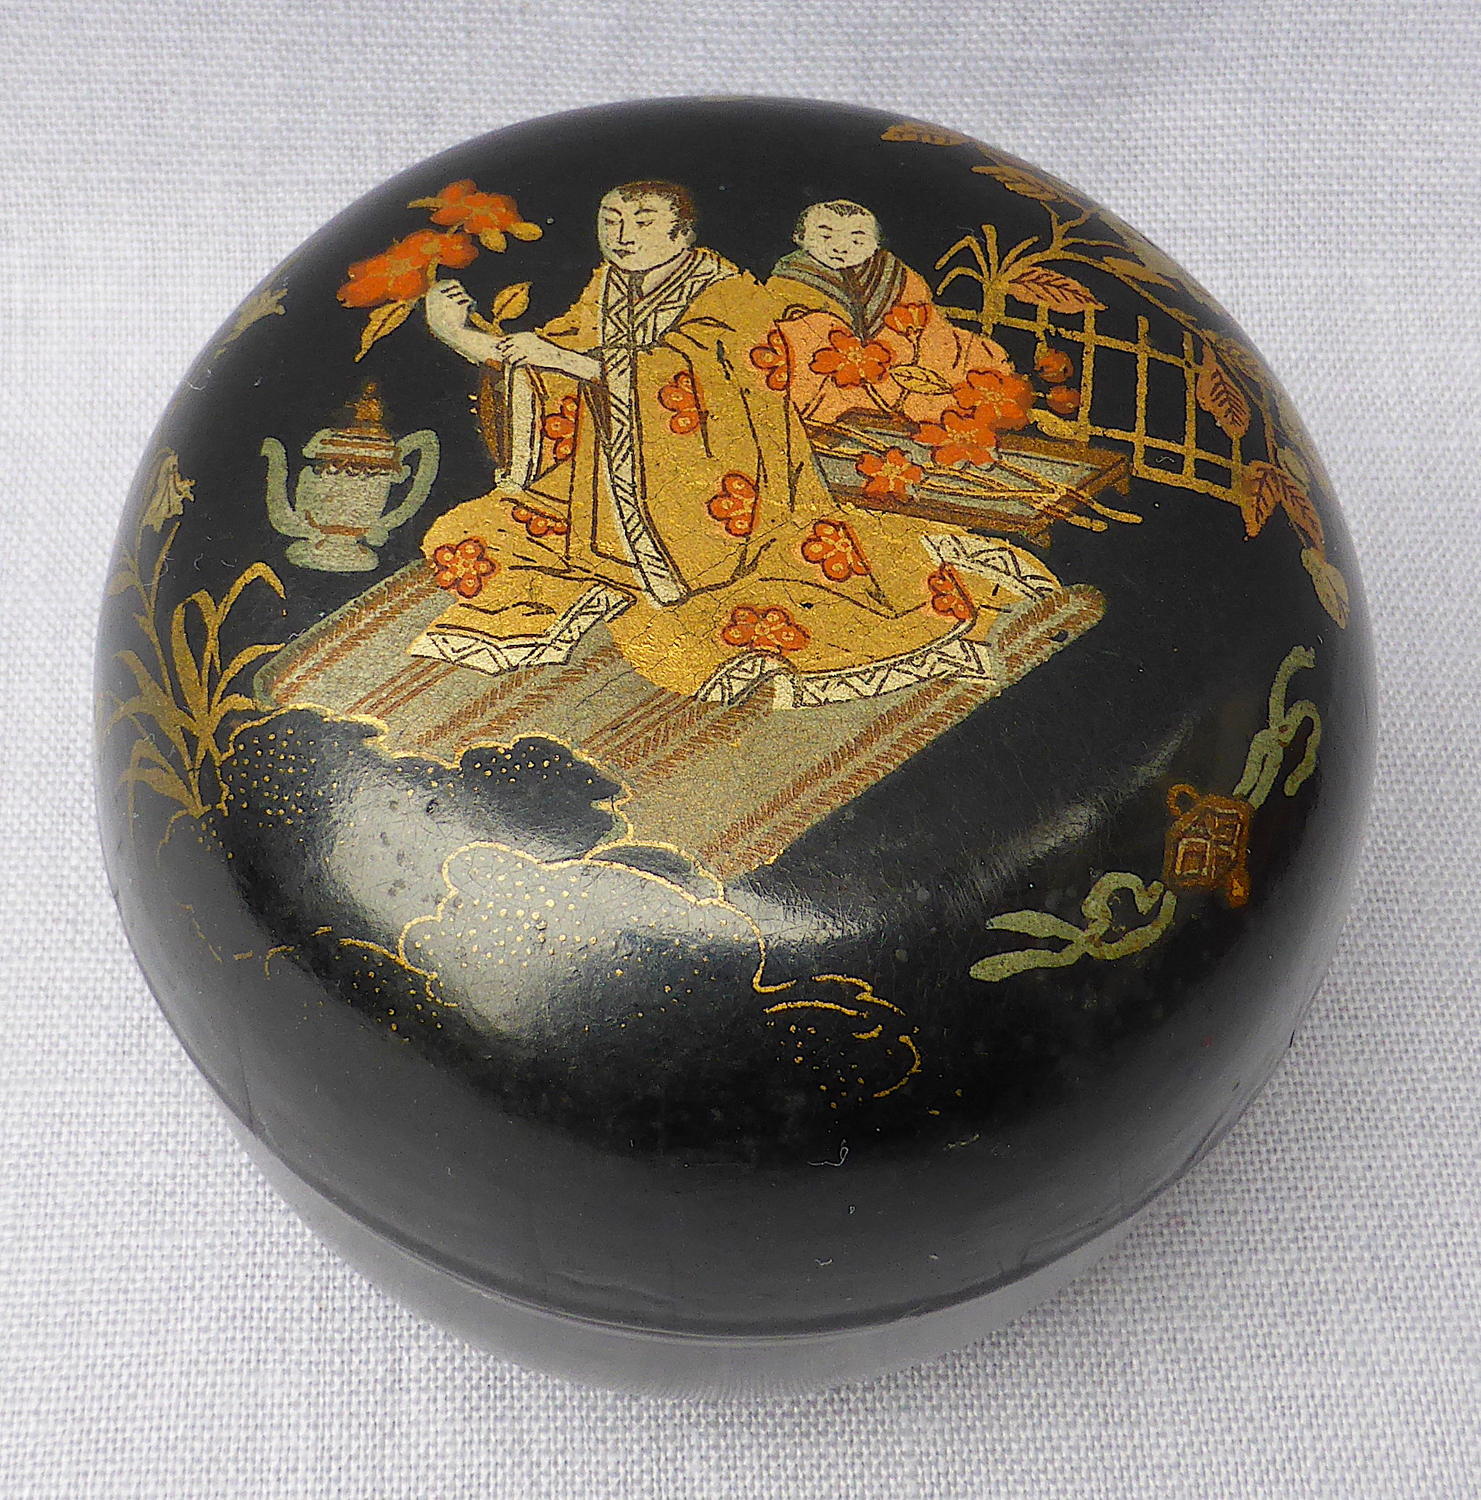 Japanese export lacquerware lidded box